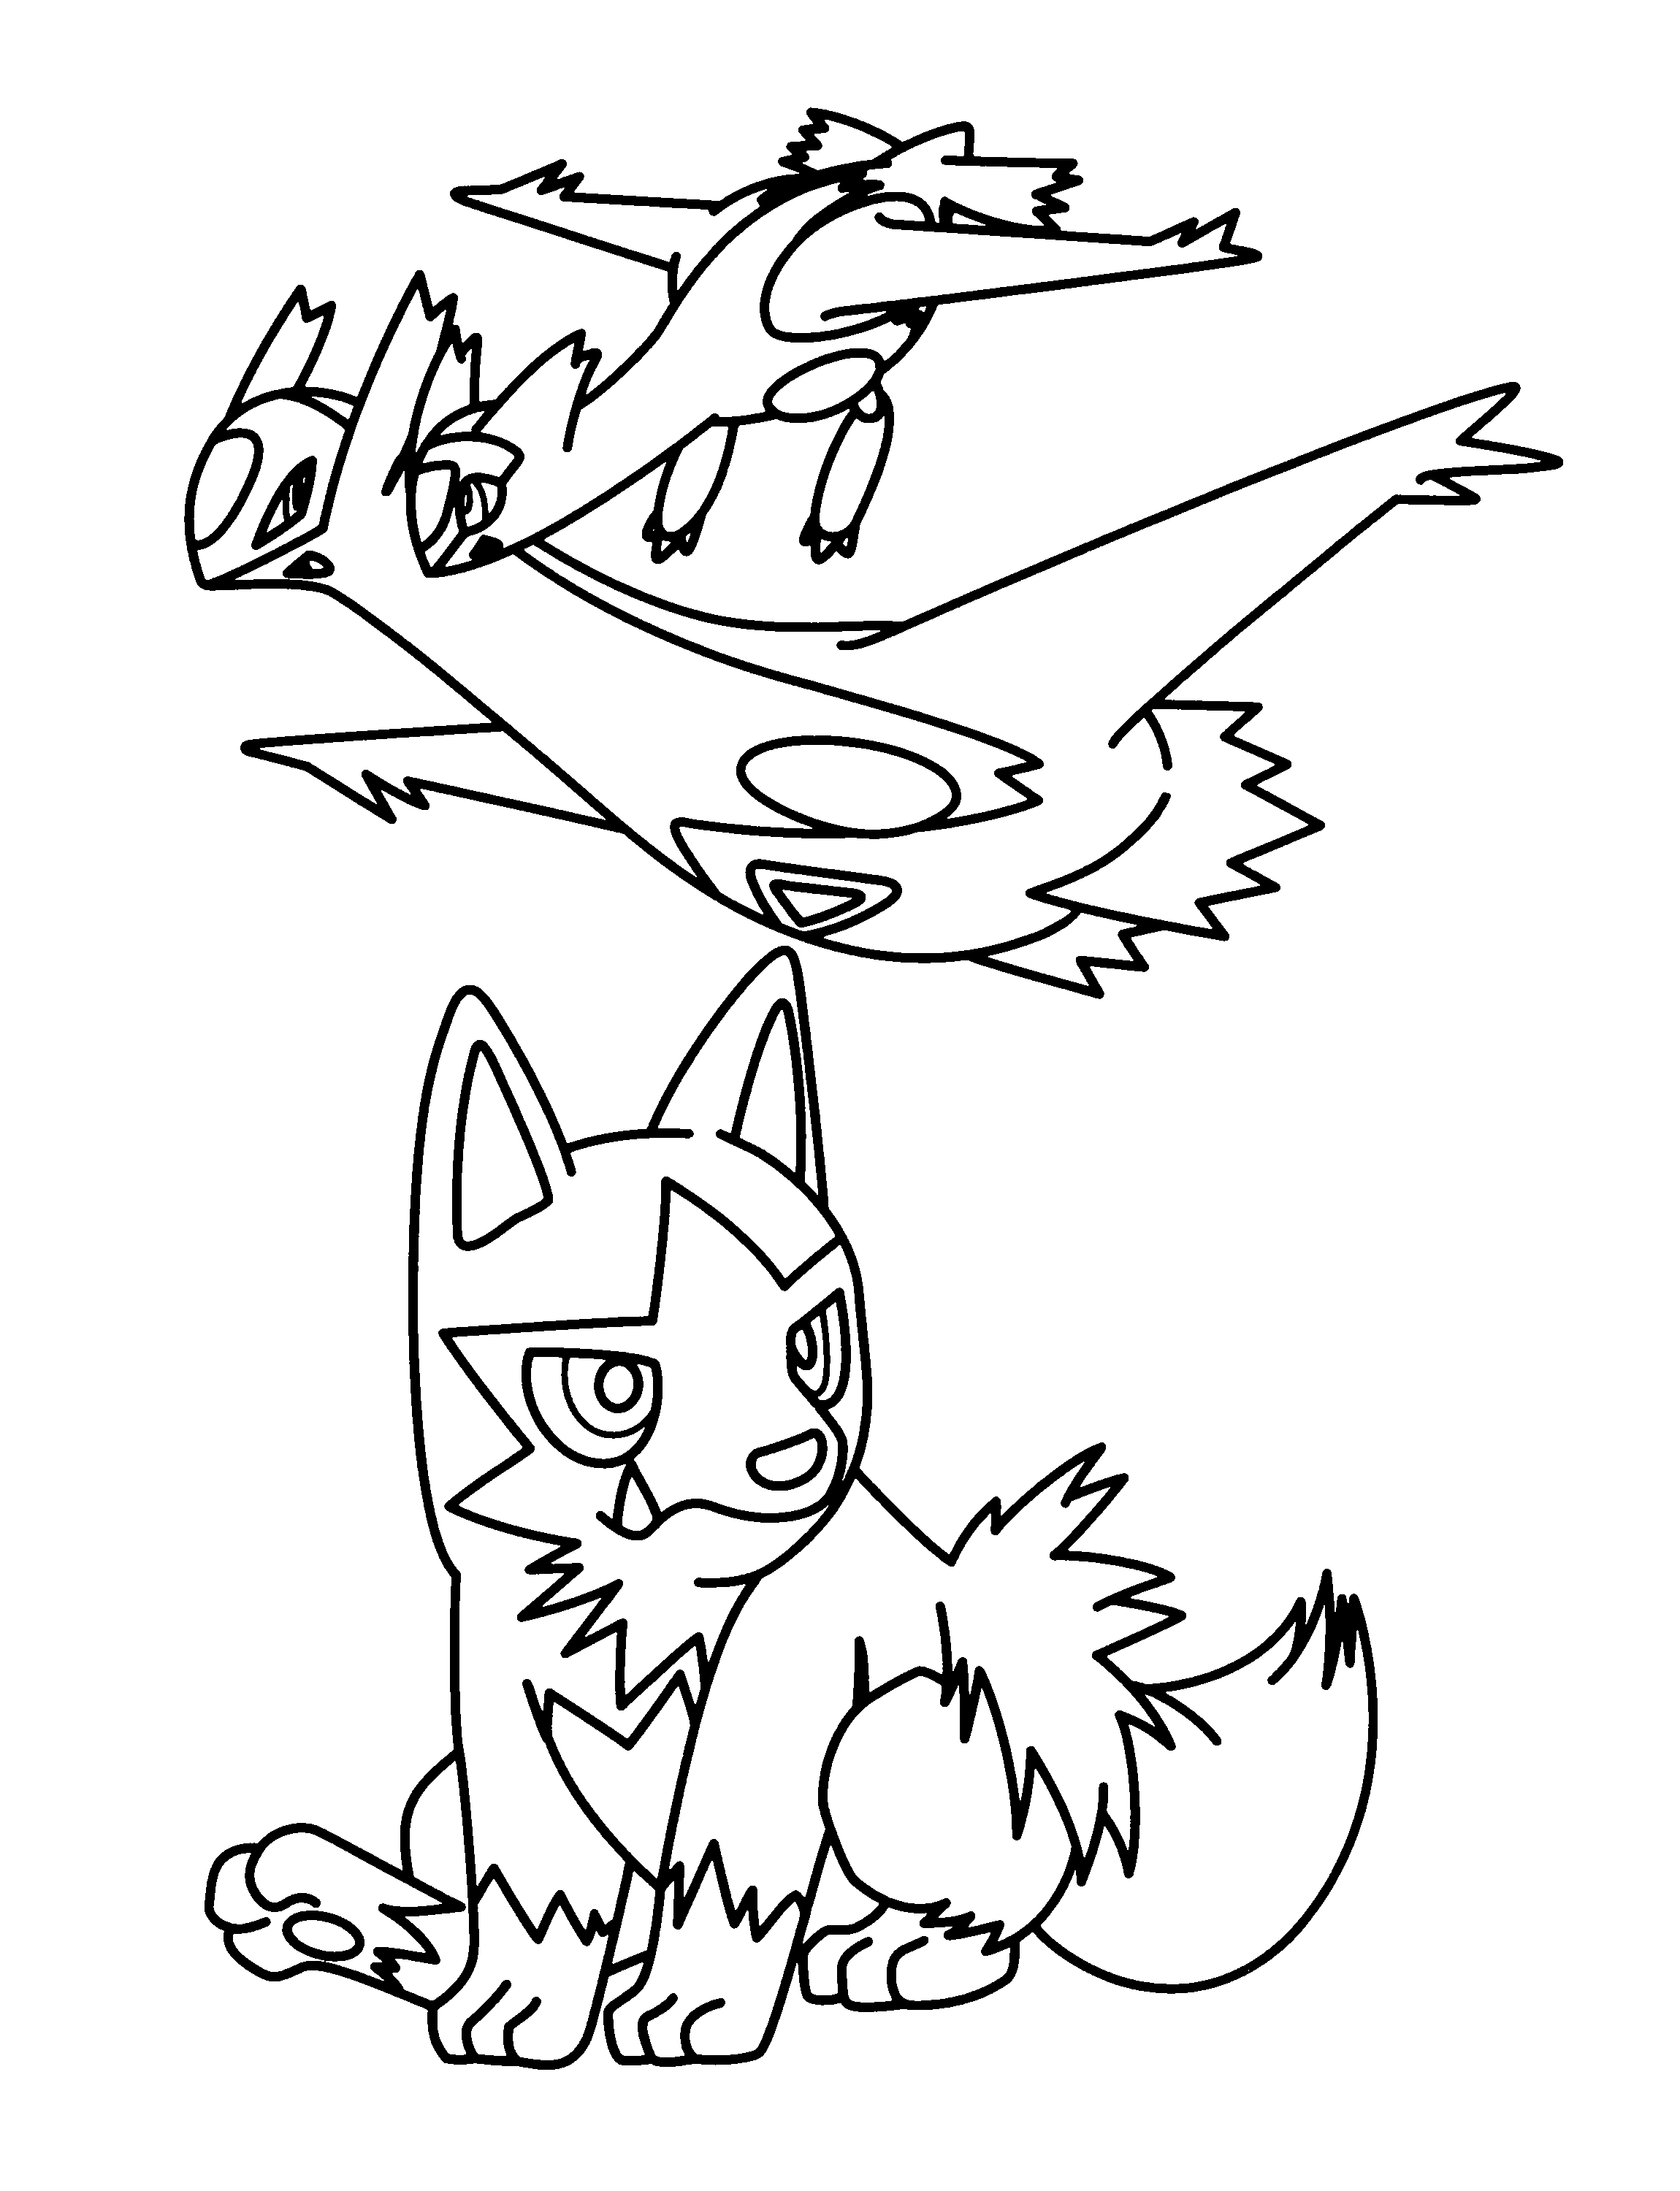 Poochyena Coloring Pages Images Of Poochyena Pokemon Coloring Pages Rock Cafe